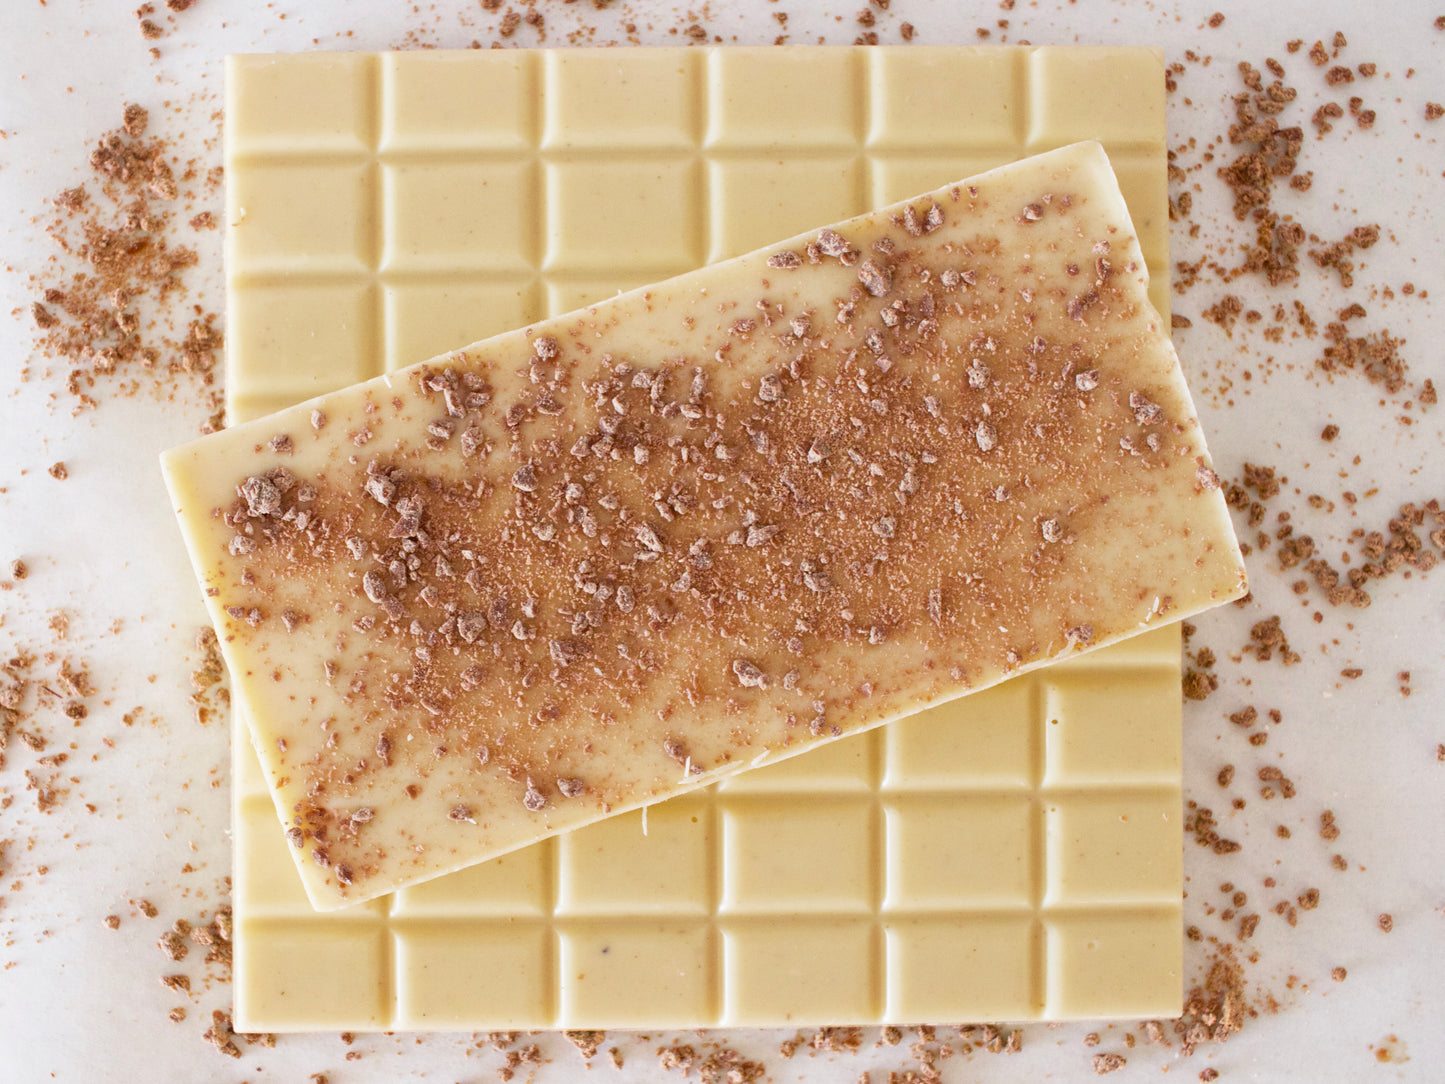 image shows 3, 100g white vanilla chocolate bars, with one side sprinkled with milk chocolate crumb.